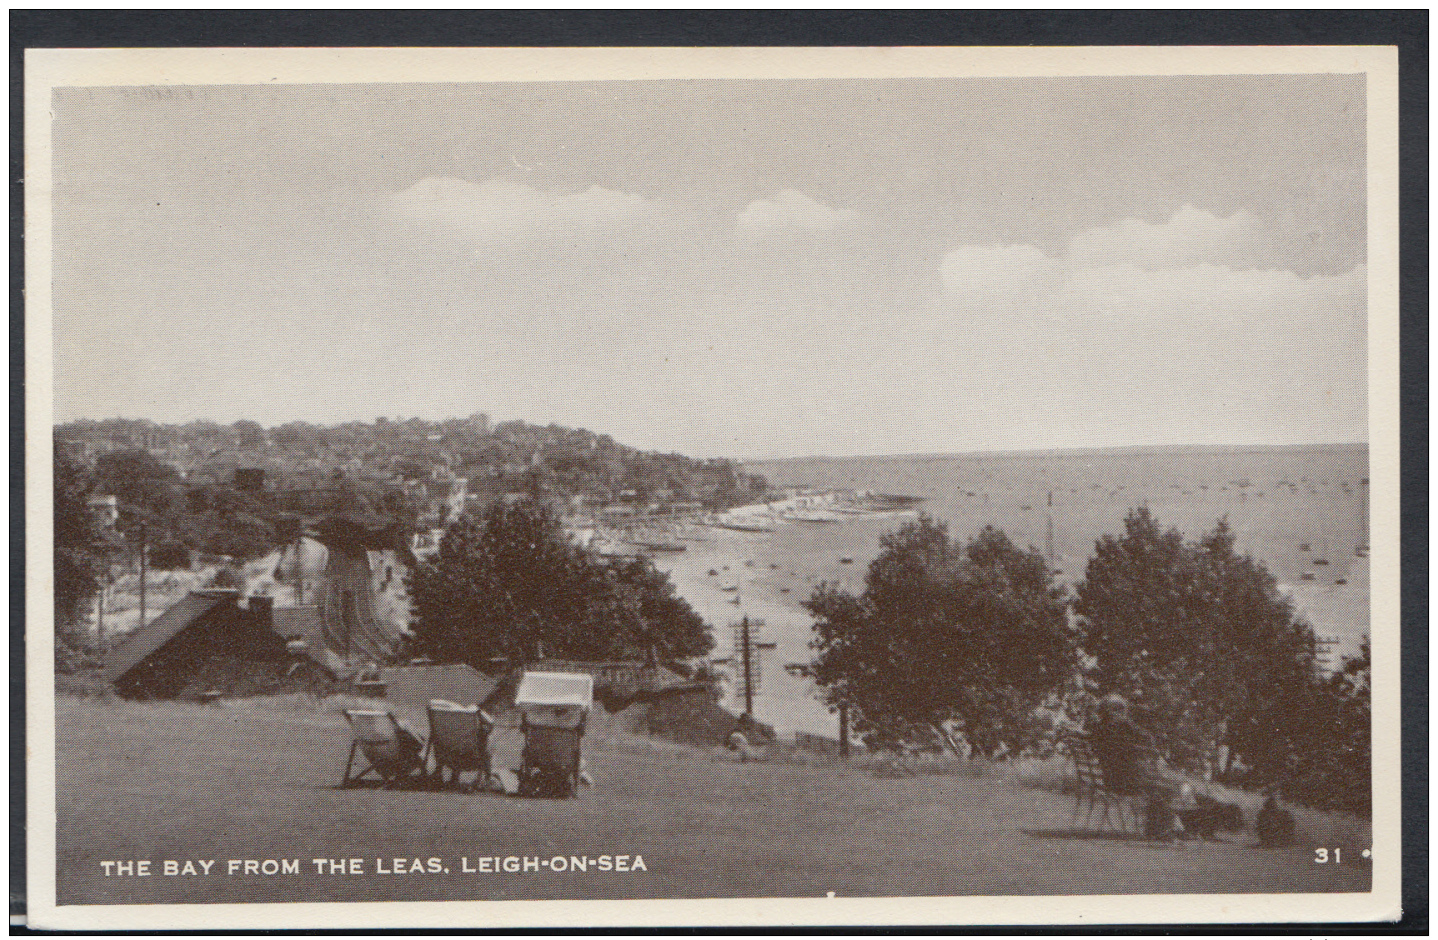 Essex Postcard - The Bay From The Leas, Leigh-On-Sea   DC1713 - Southend, Westcliff & Leigh